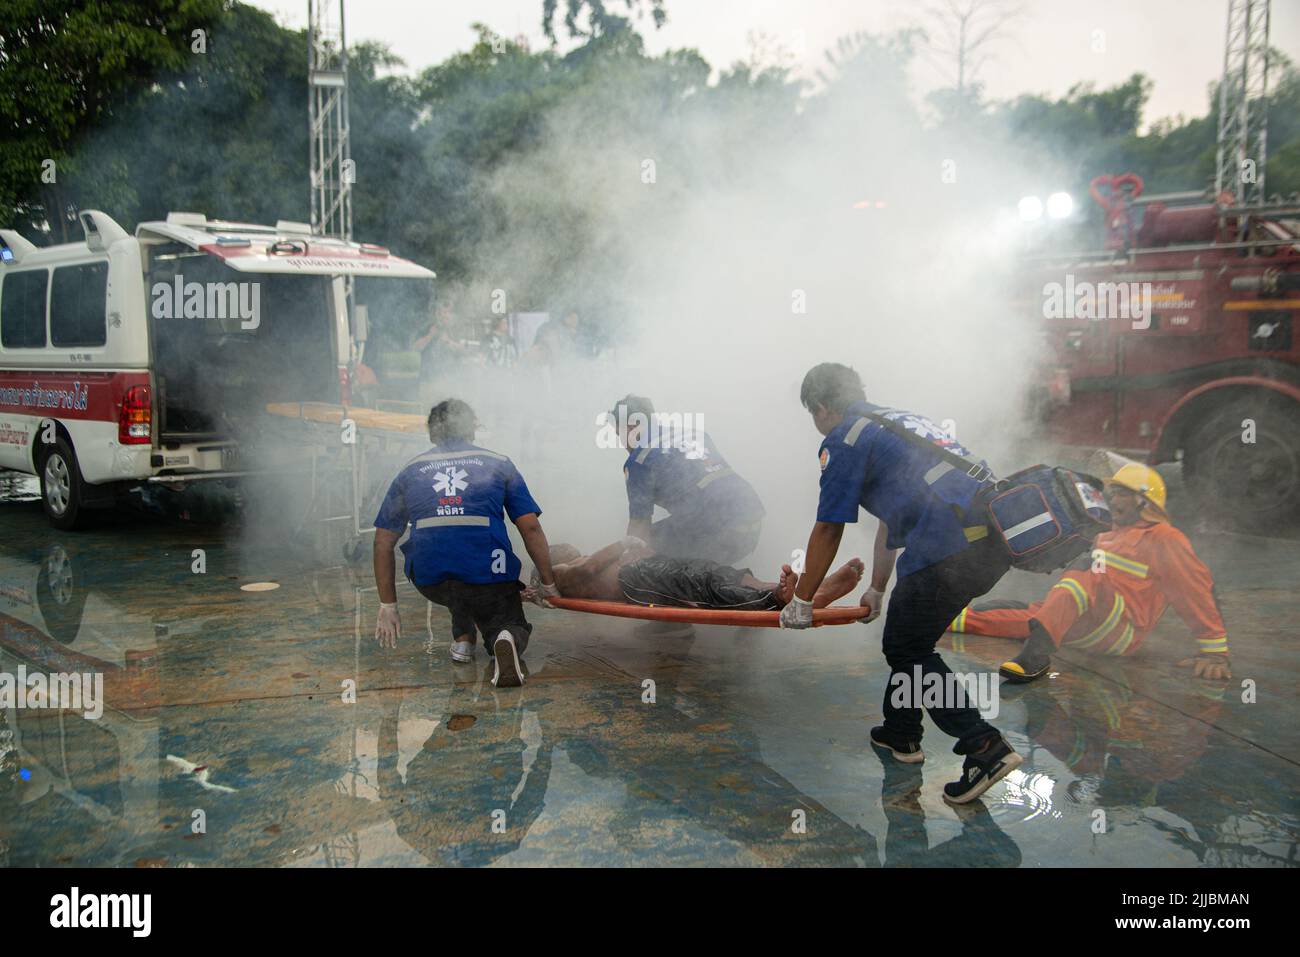 Unknown rescuers and fire brigade Conduct fire-rescue drills by pulling wagons with the injured. Put on a ventilator and take him to an ambulance. Stock Photo